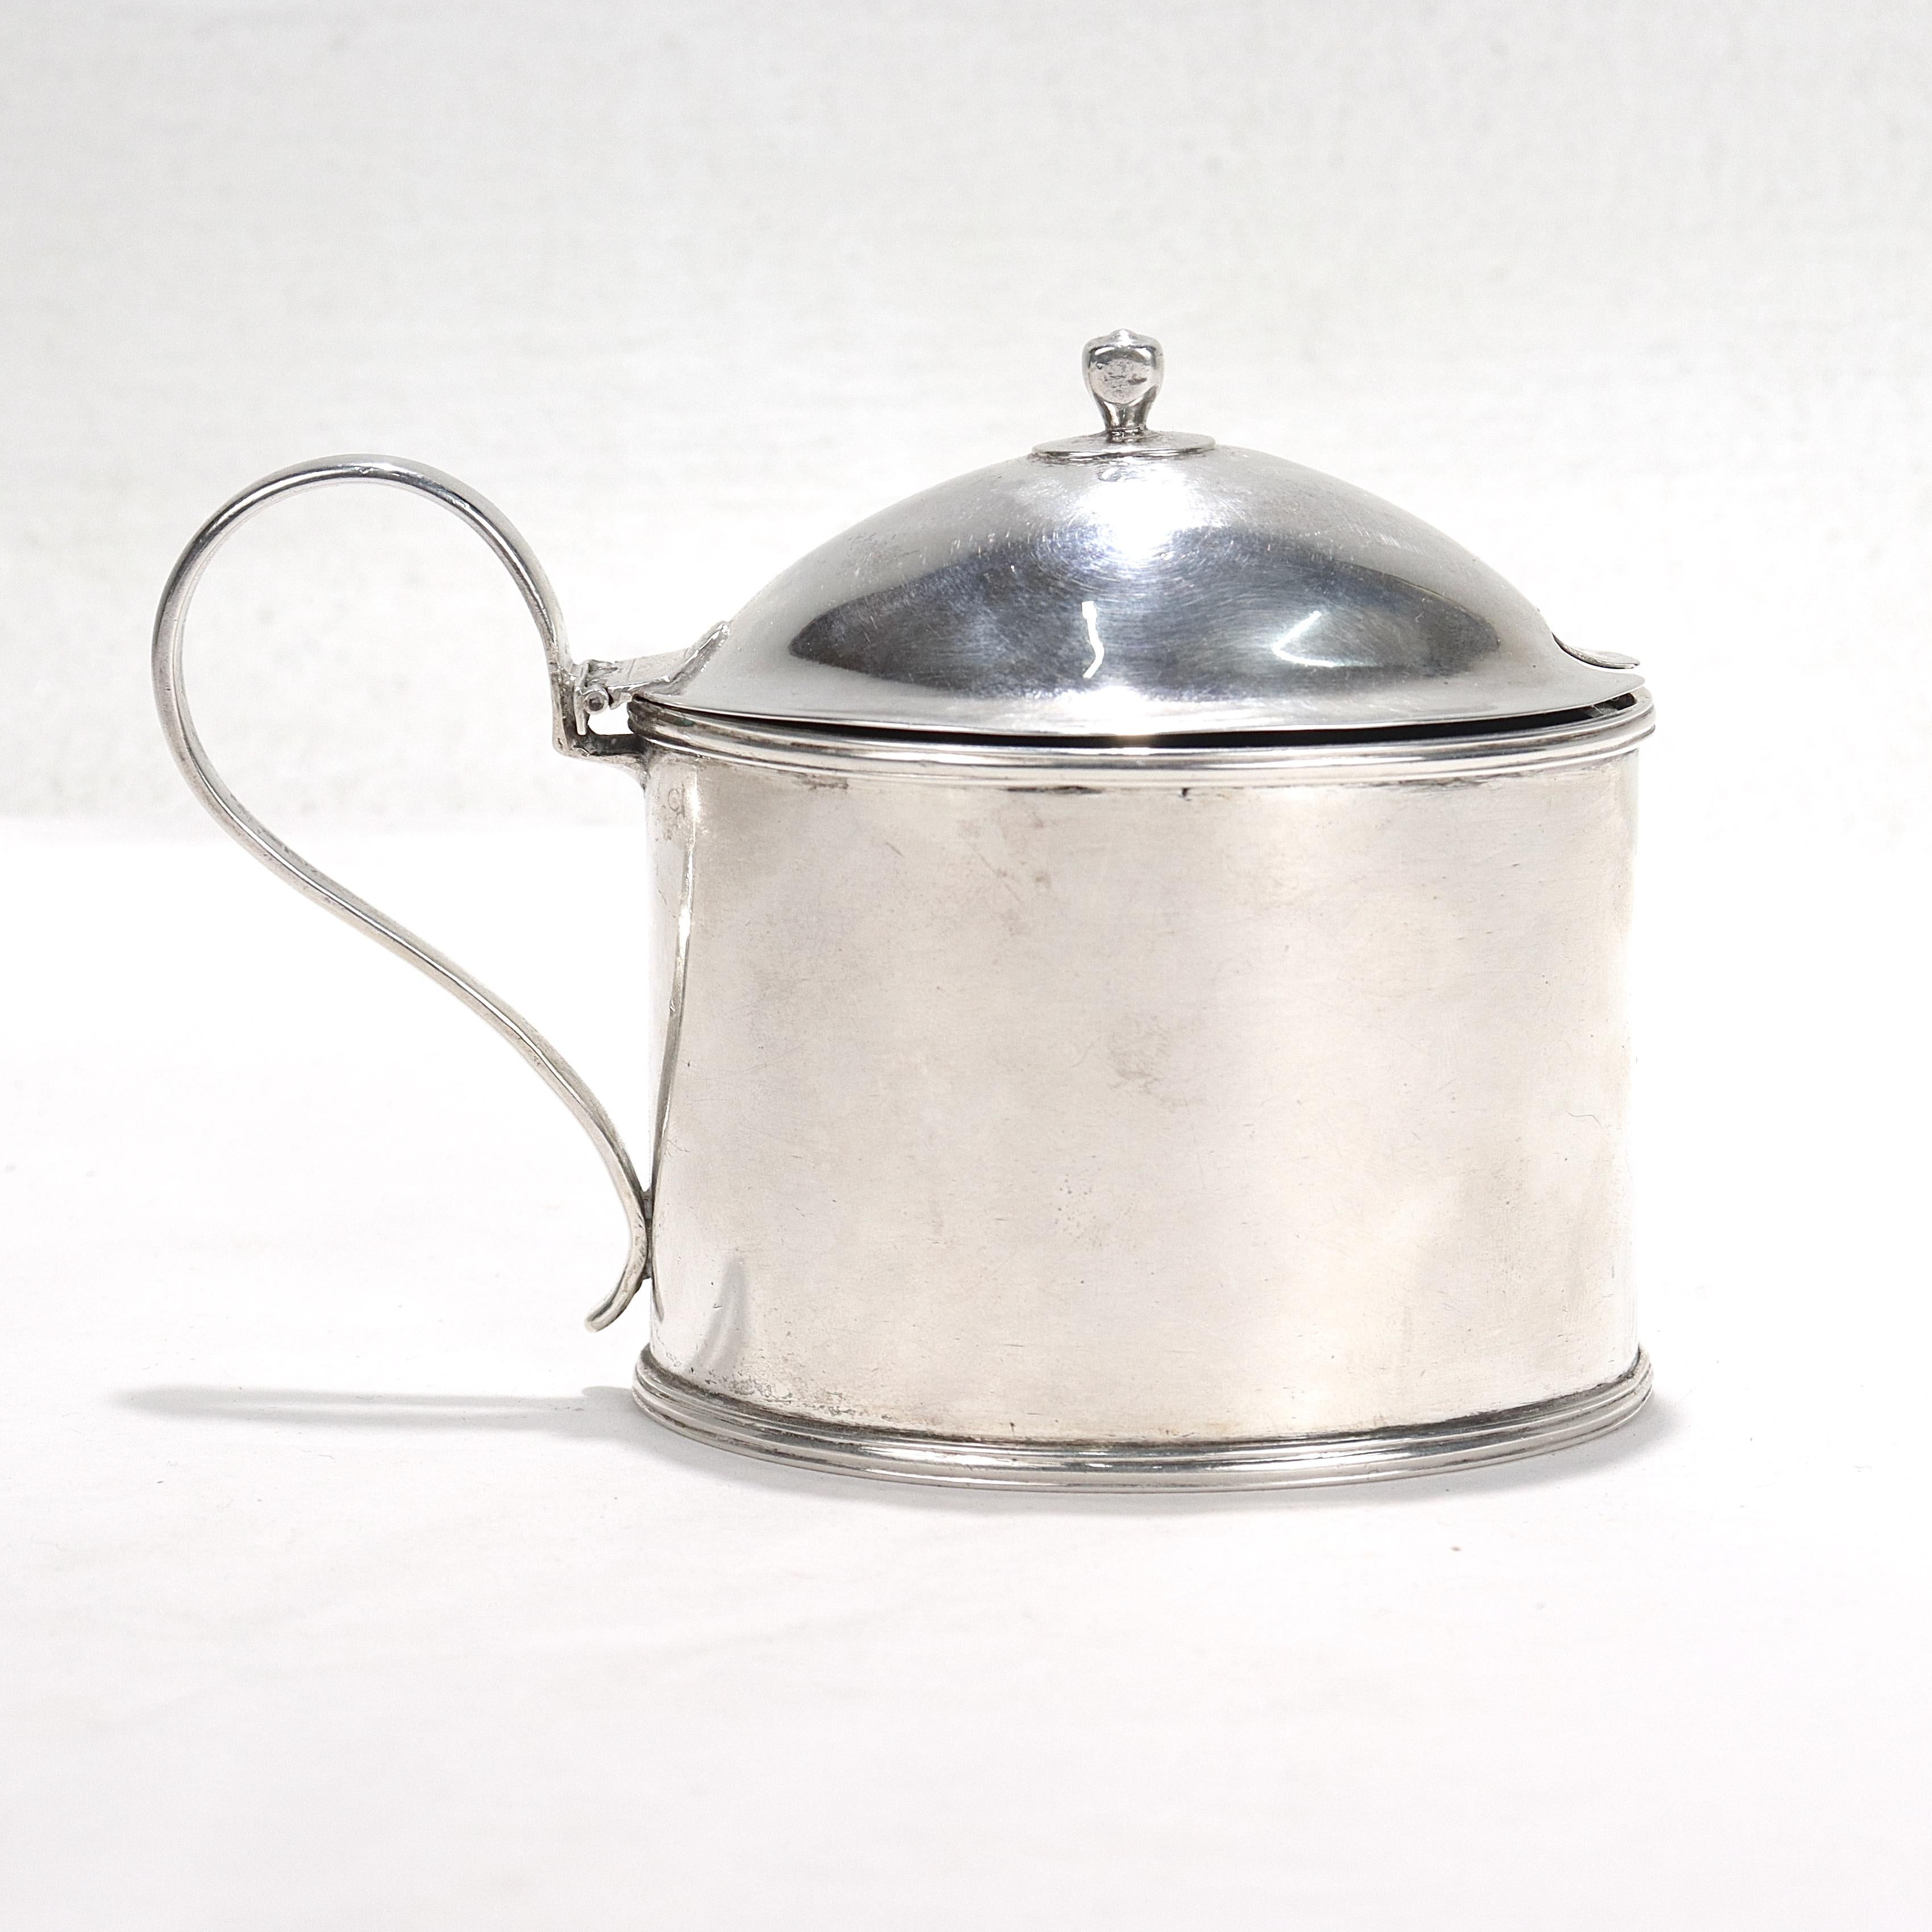 A fine antique silver mustard pot.

Attributed to John Mcfarlane of Phila., PA., or John McMullin of Phila., PA.

The interior and base of the pot is a removable cobalt glass insert.

Simply a great mustard pot!

Date:
18th